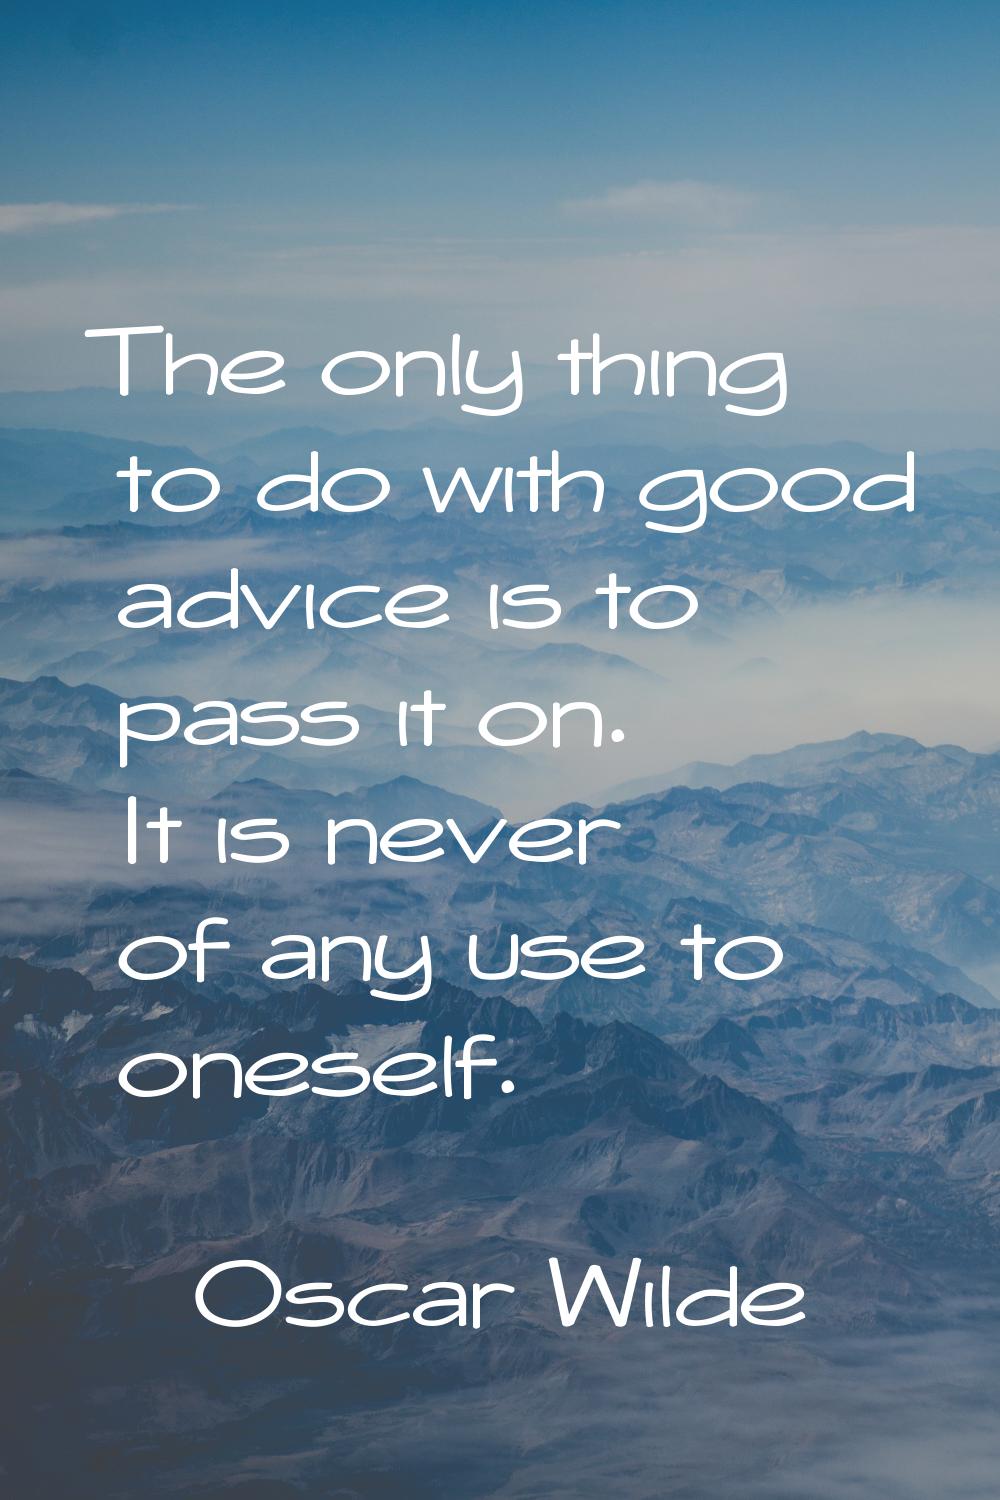 The only thing to do with good advice is to pass it on. It is never of any use to oneself.